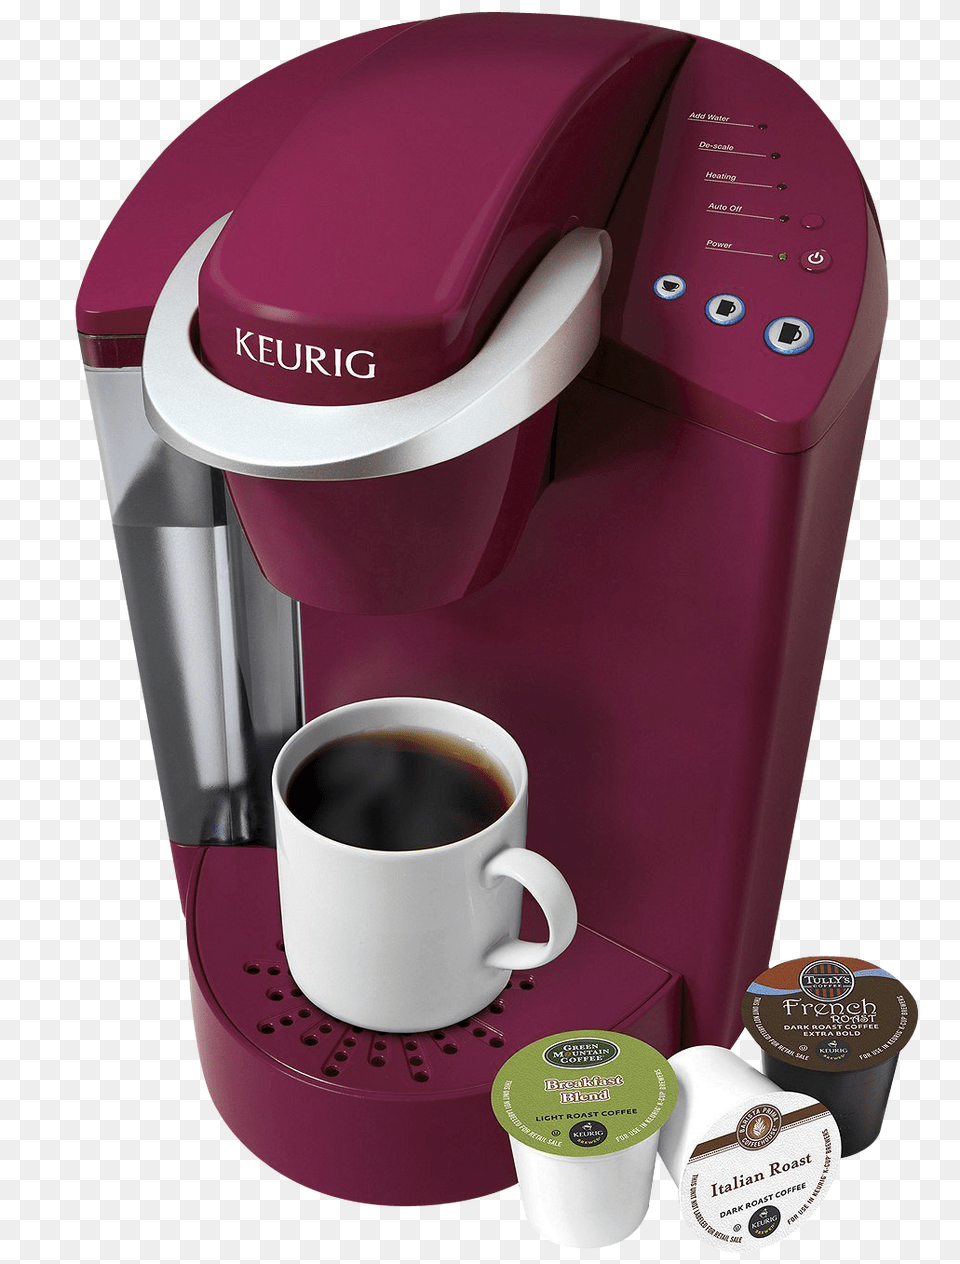 Coffee Maker With Brew Cup, Beverage, Coffee Cup, Bottle Png Image